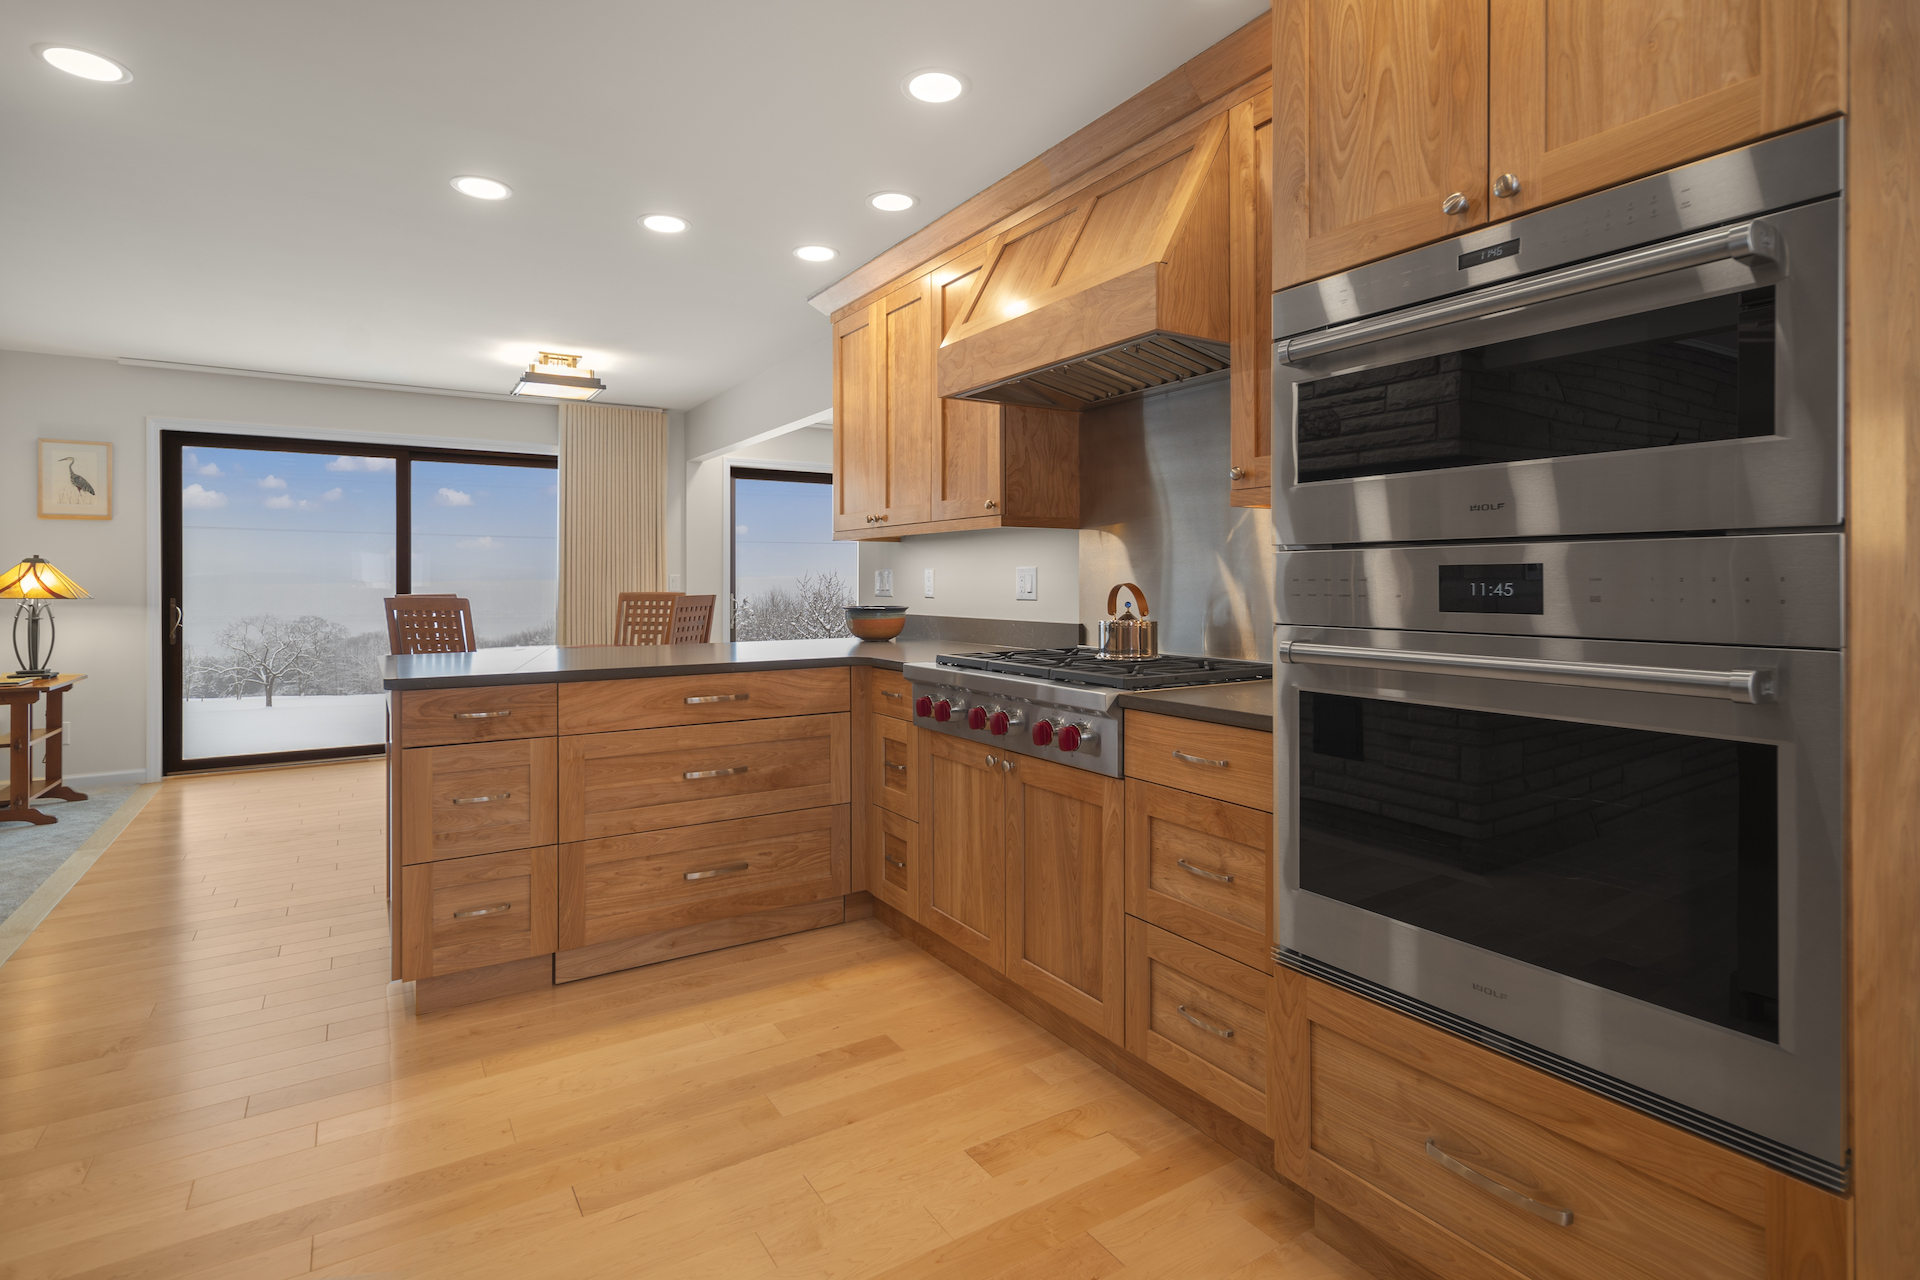 Home addition with wall-mount ovens in kitchen